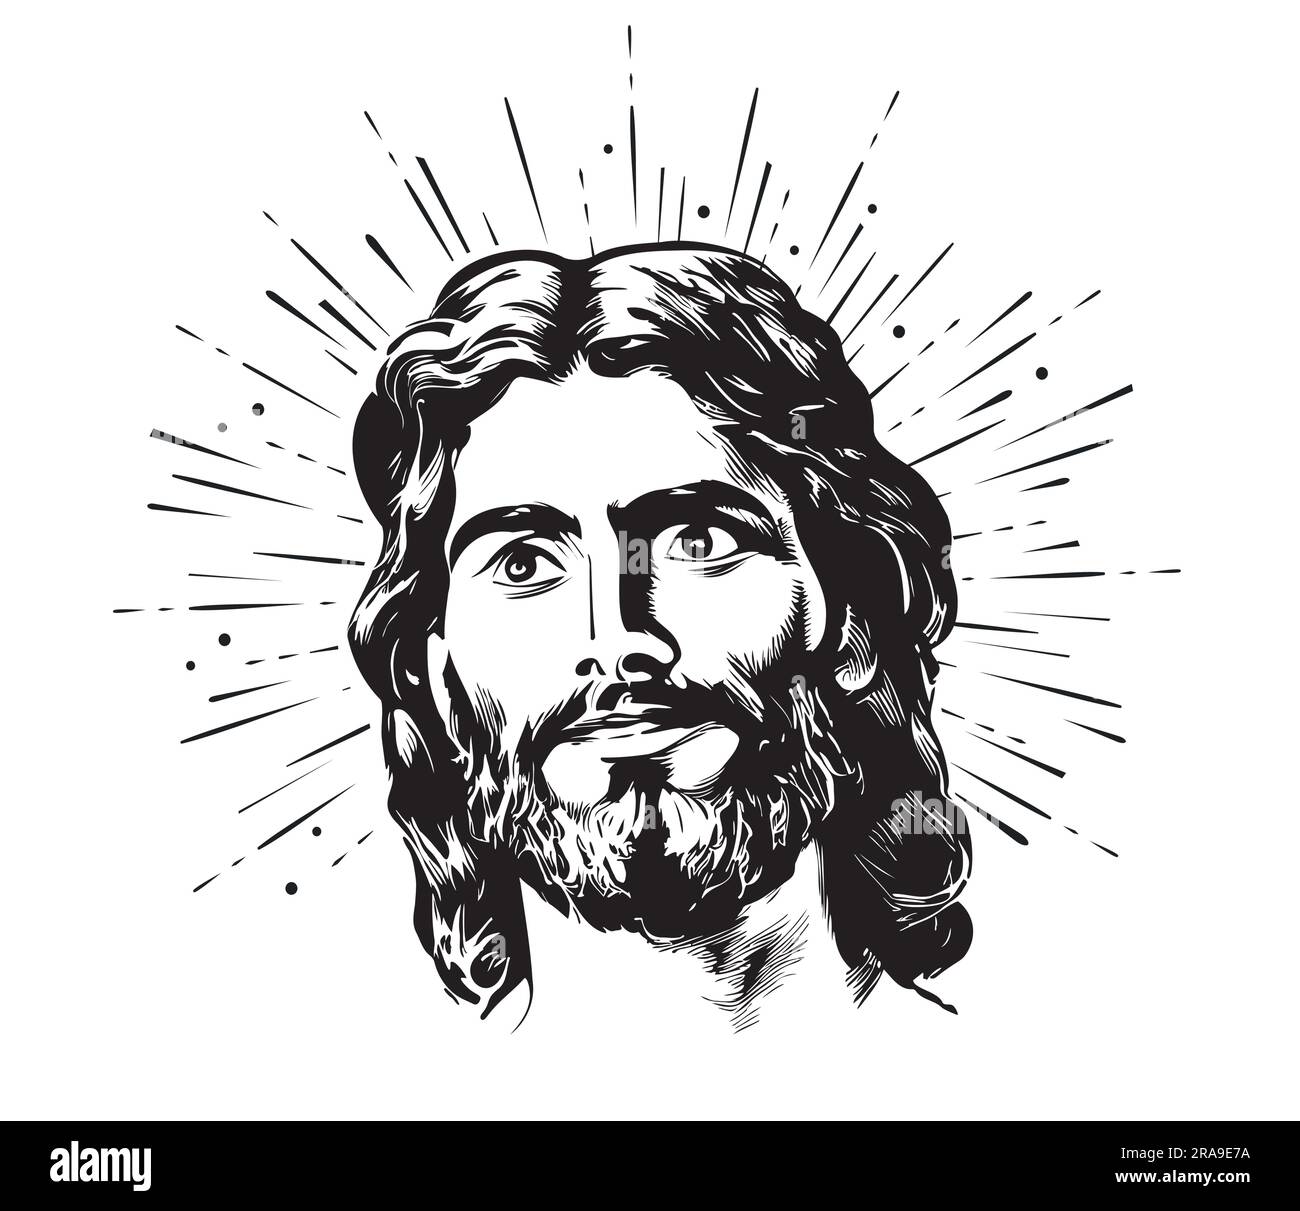 Face of Jesus smiling abstract sketch hand drawn in doodle style ...